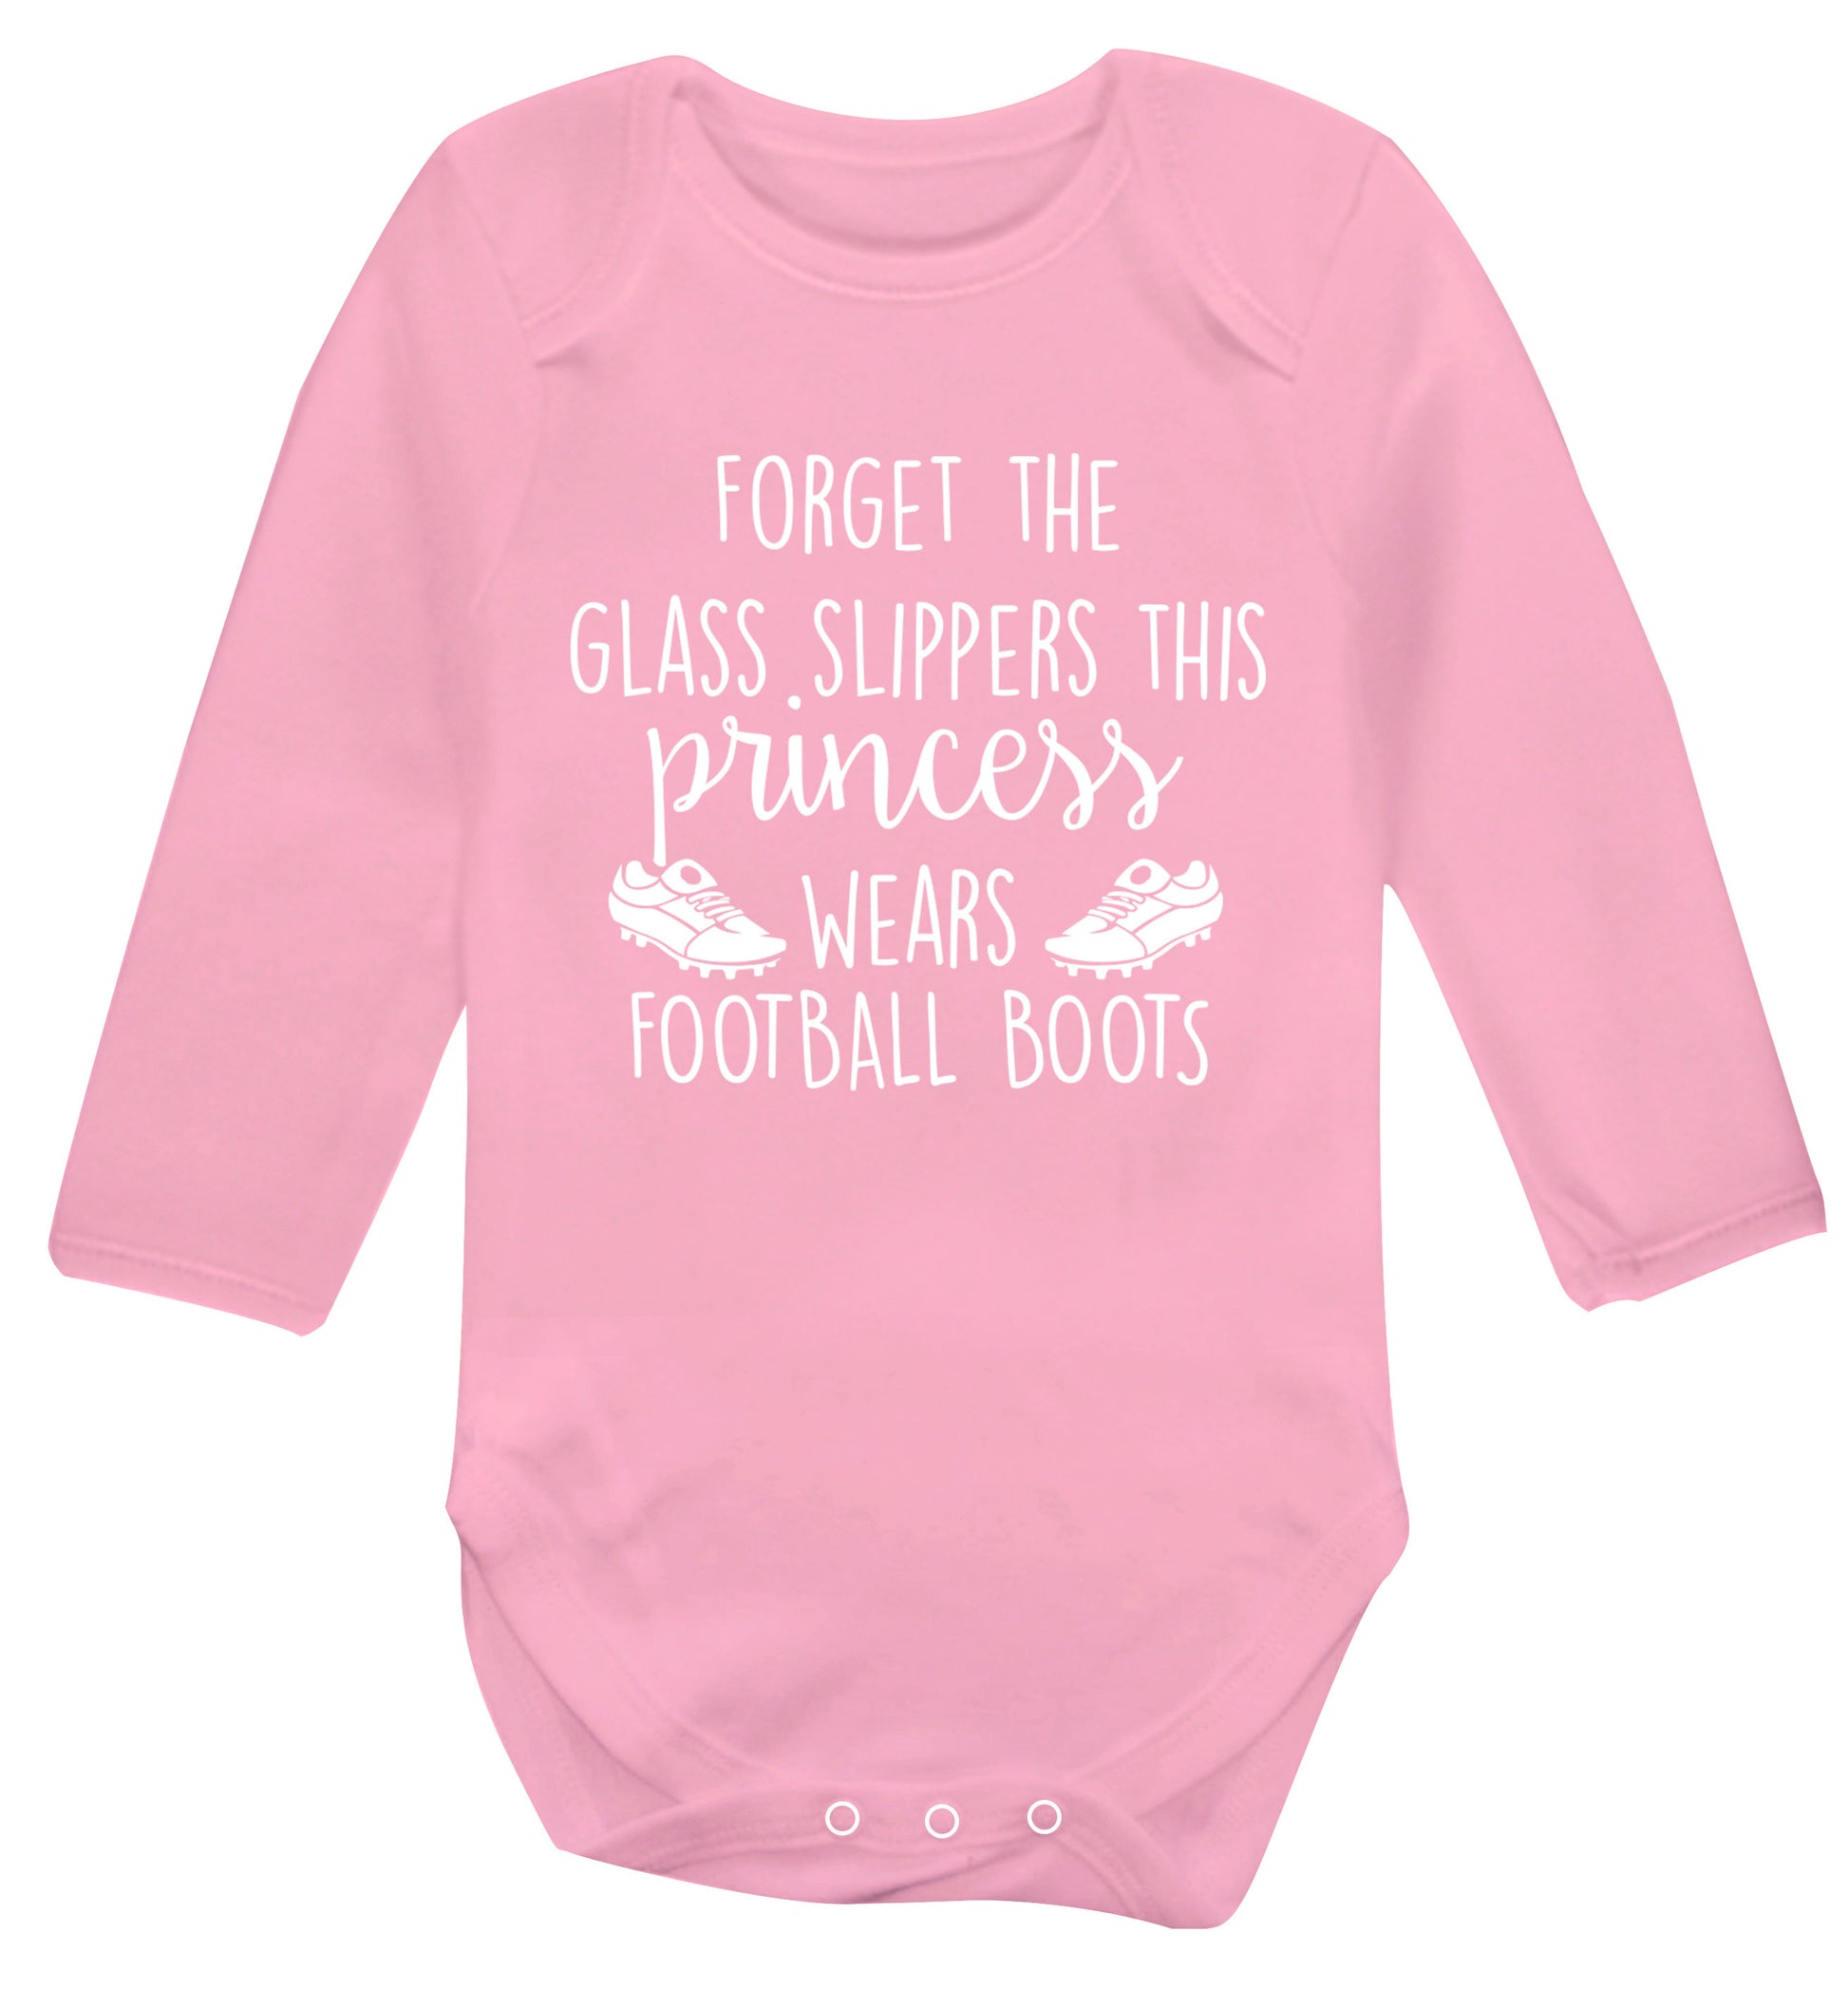 Forget the glass slippers this princess wears football boots Baby Vest long sleeved pale pink 6-12 months